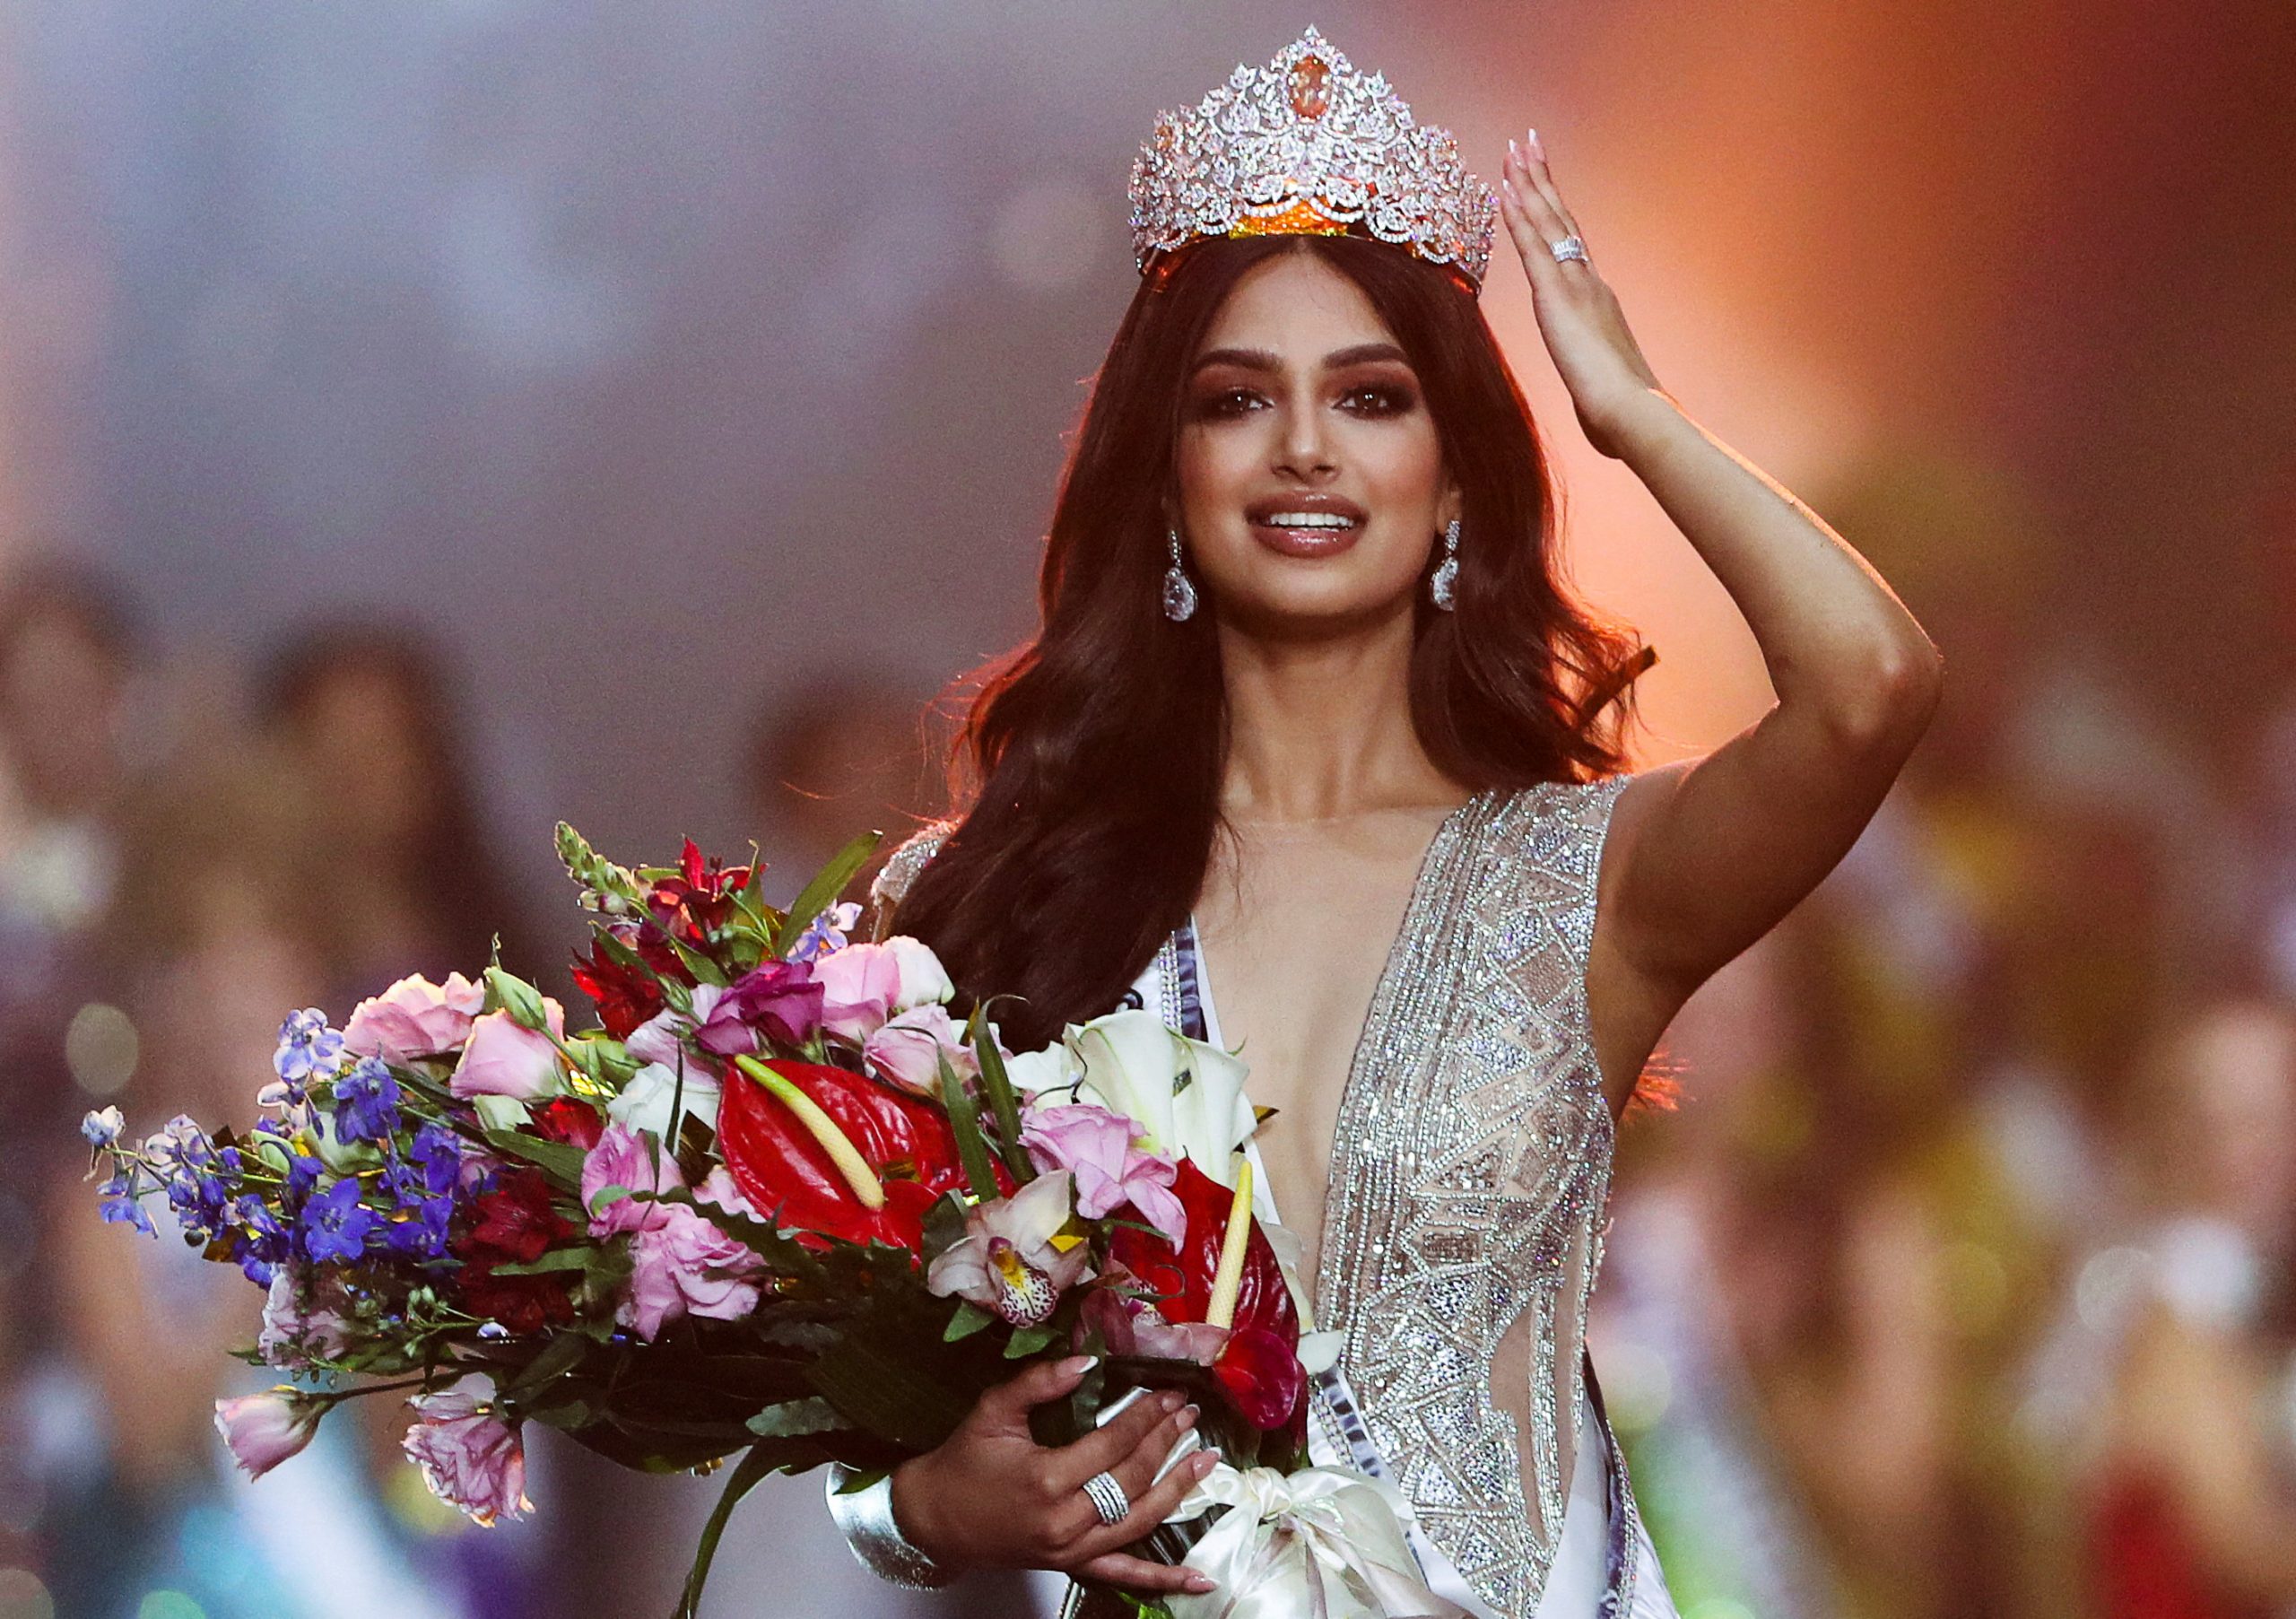 Miss Universe 2022 - What You Need To Know